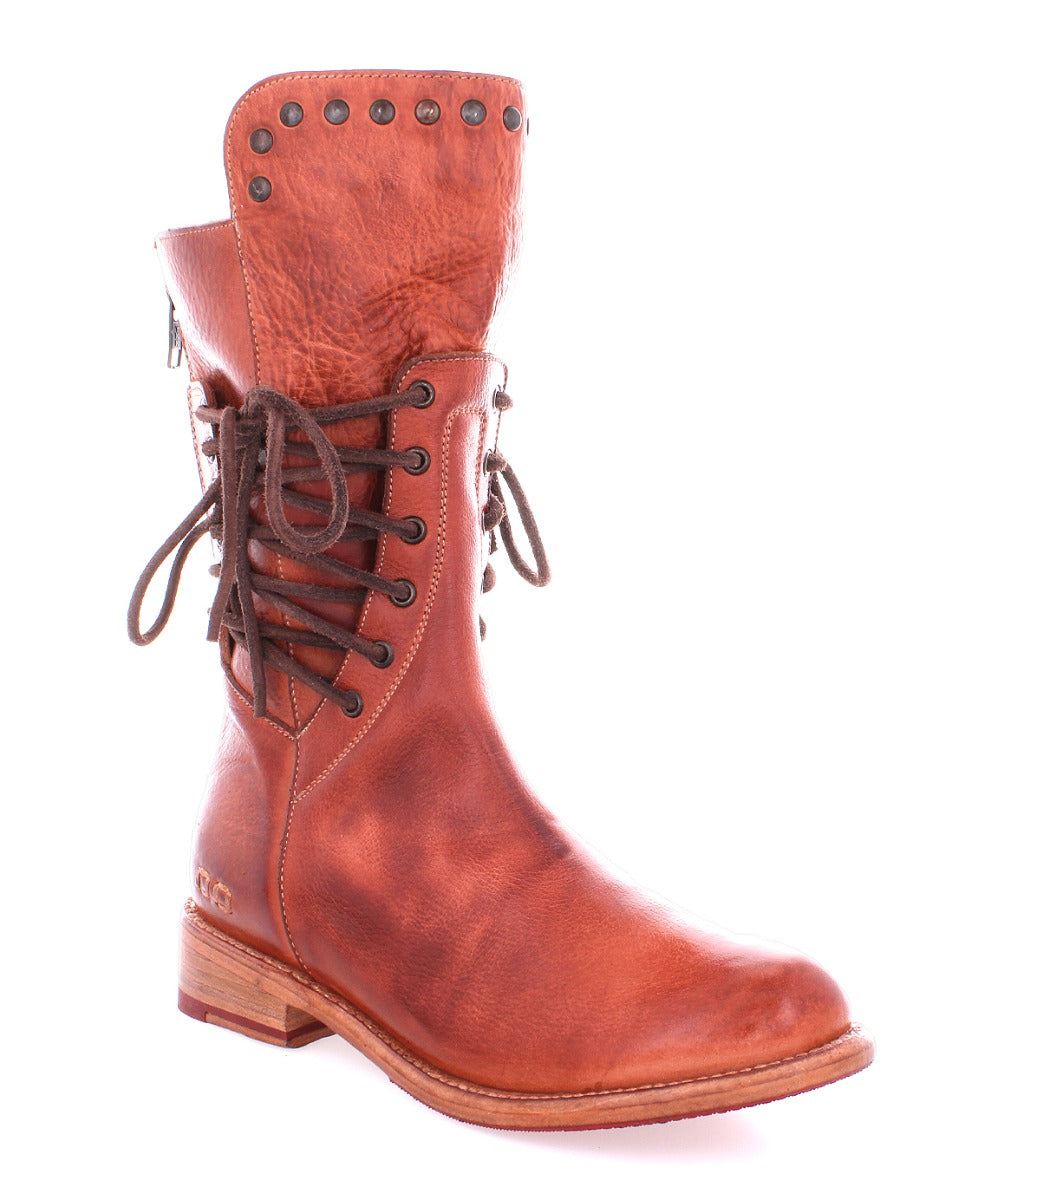 A women's brown leather Fen boot with laces by Bed Stu.